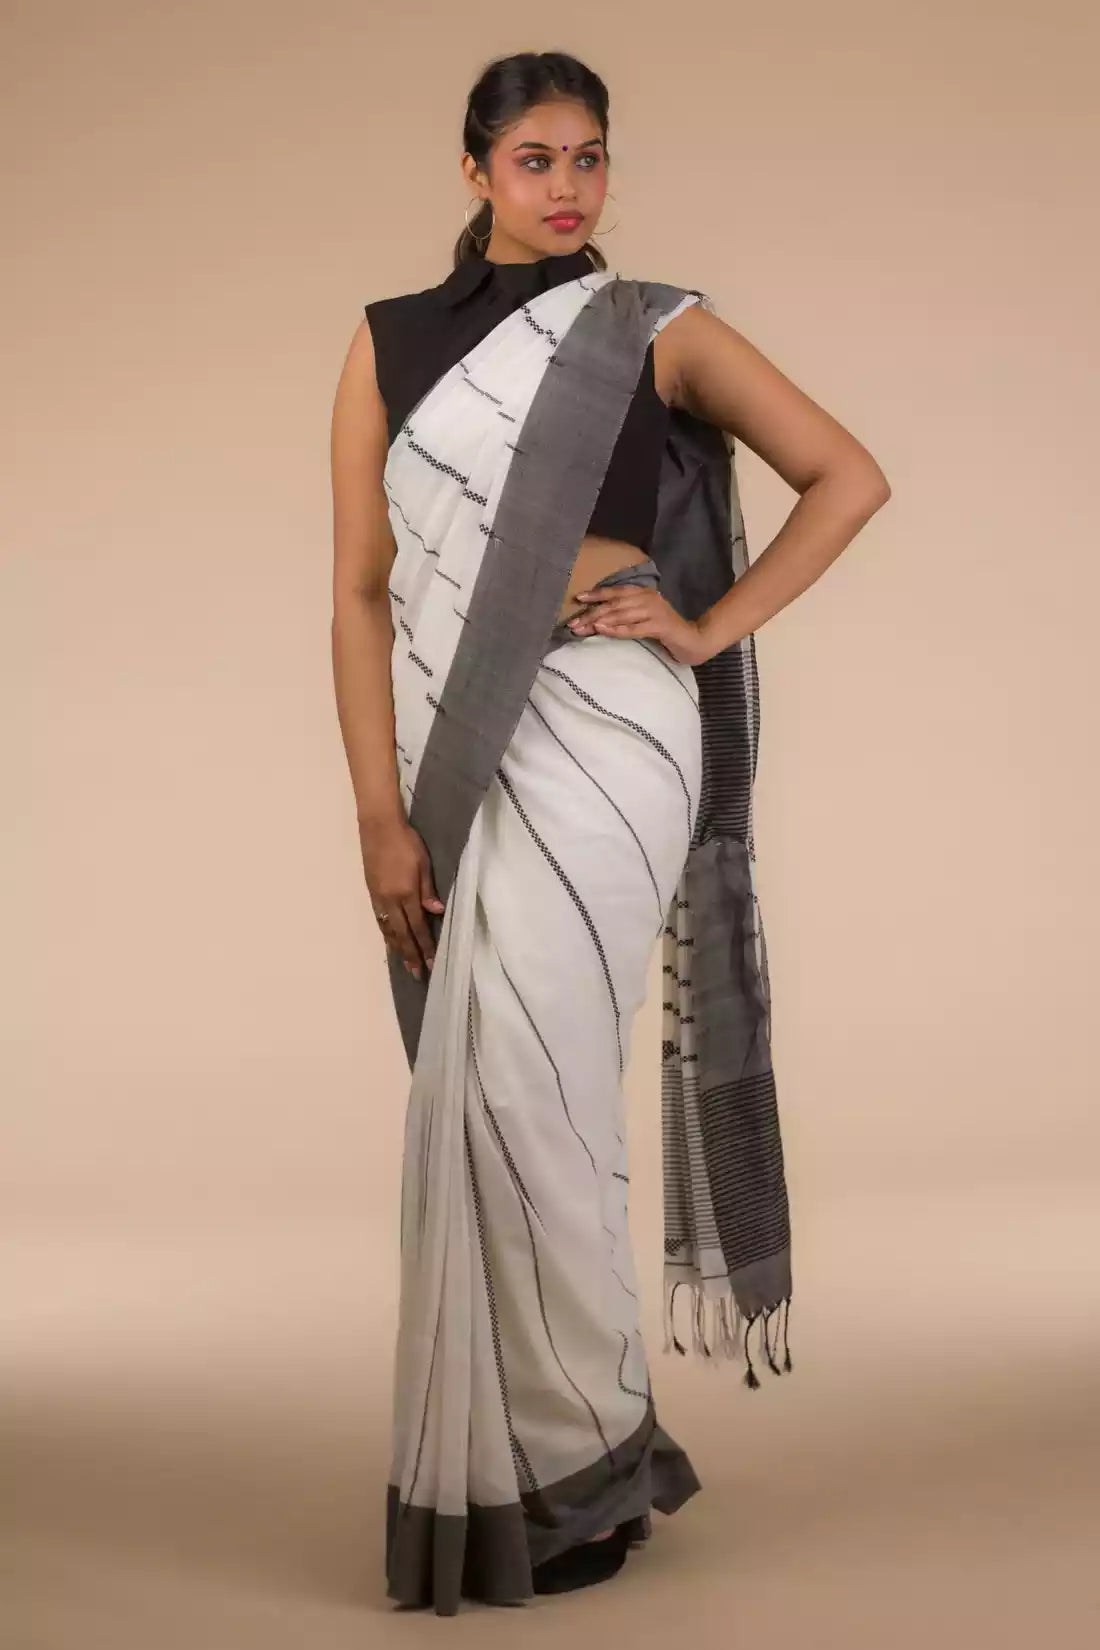 Side view of a woman wearing white saree with black stripes on it